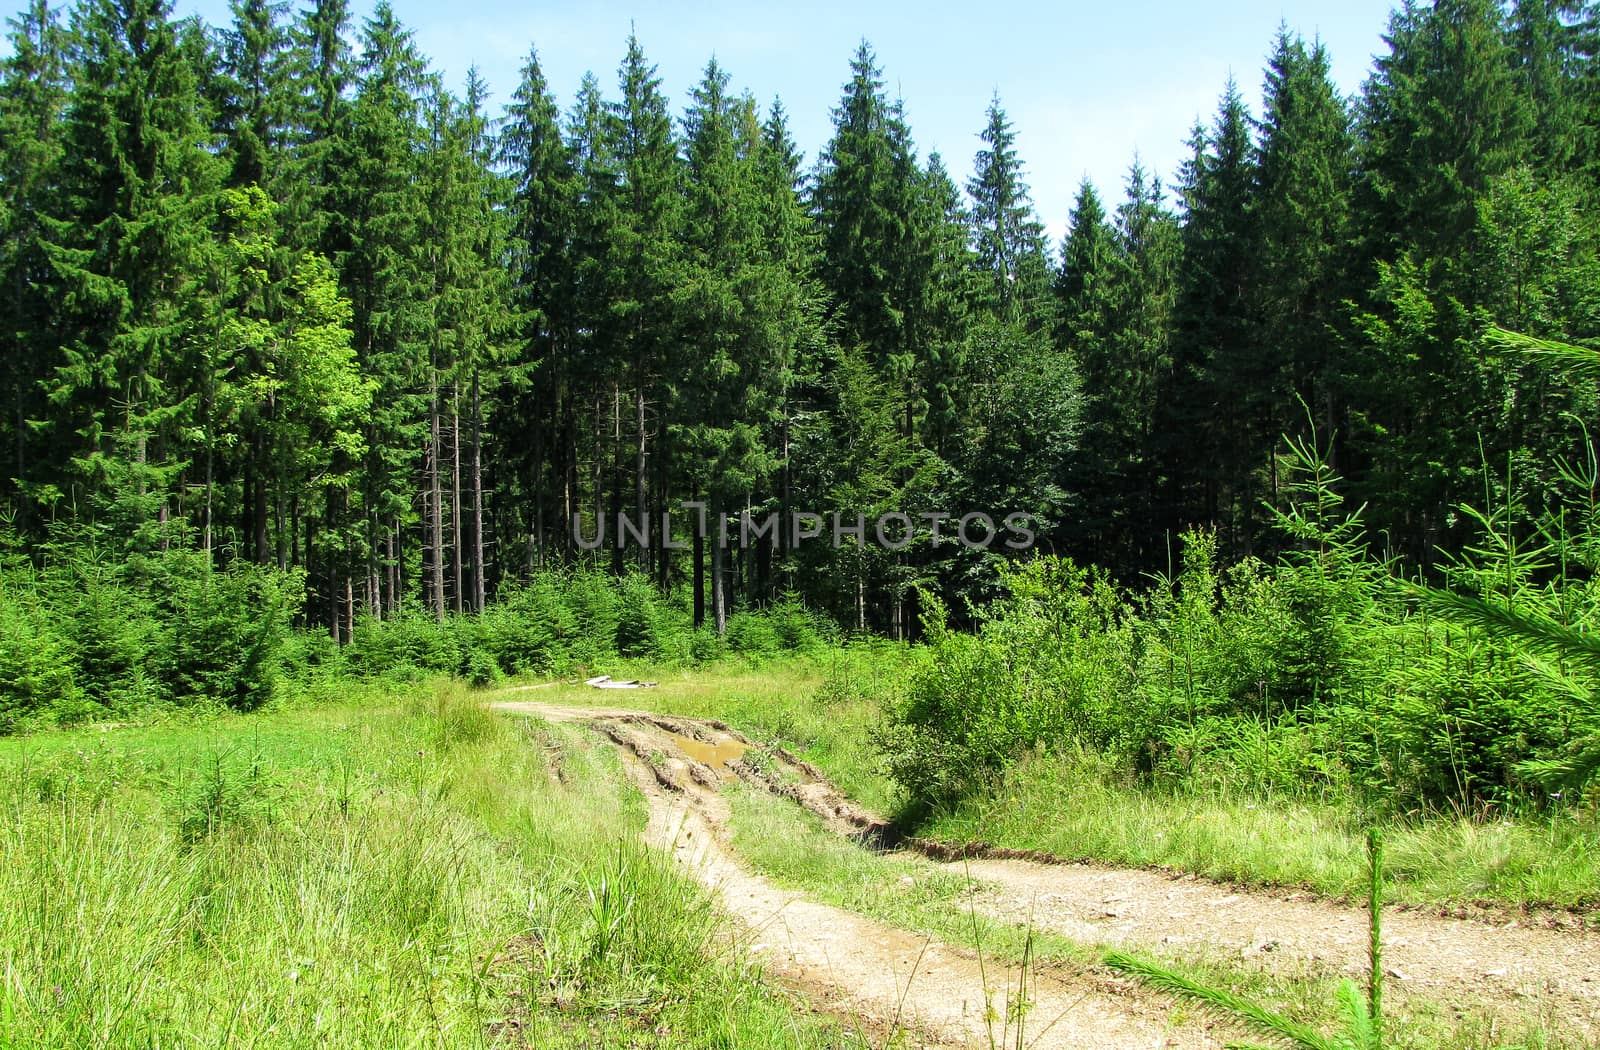 An old broken road with puddles and mud passes through a green meadow and goes towards the dense forest.